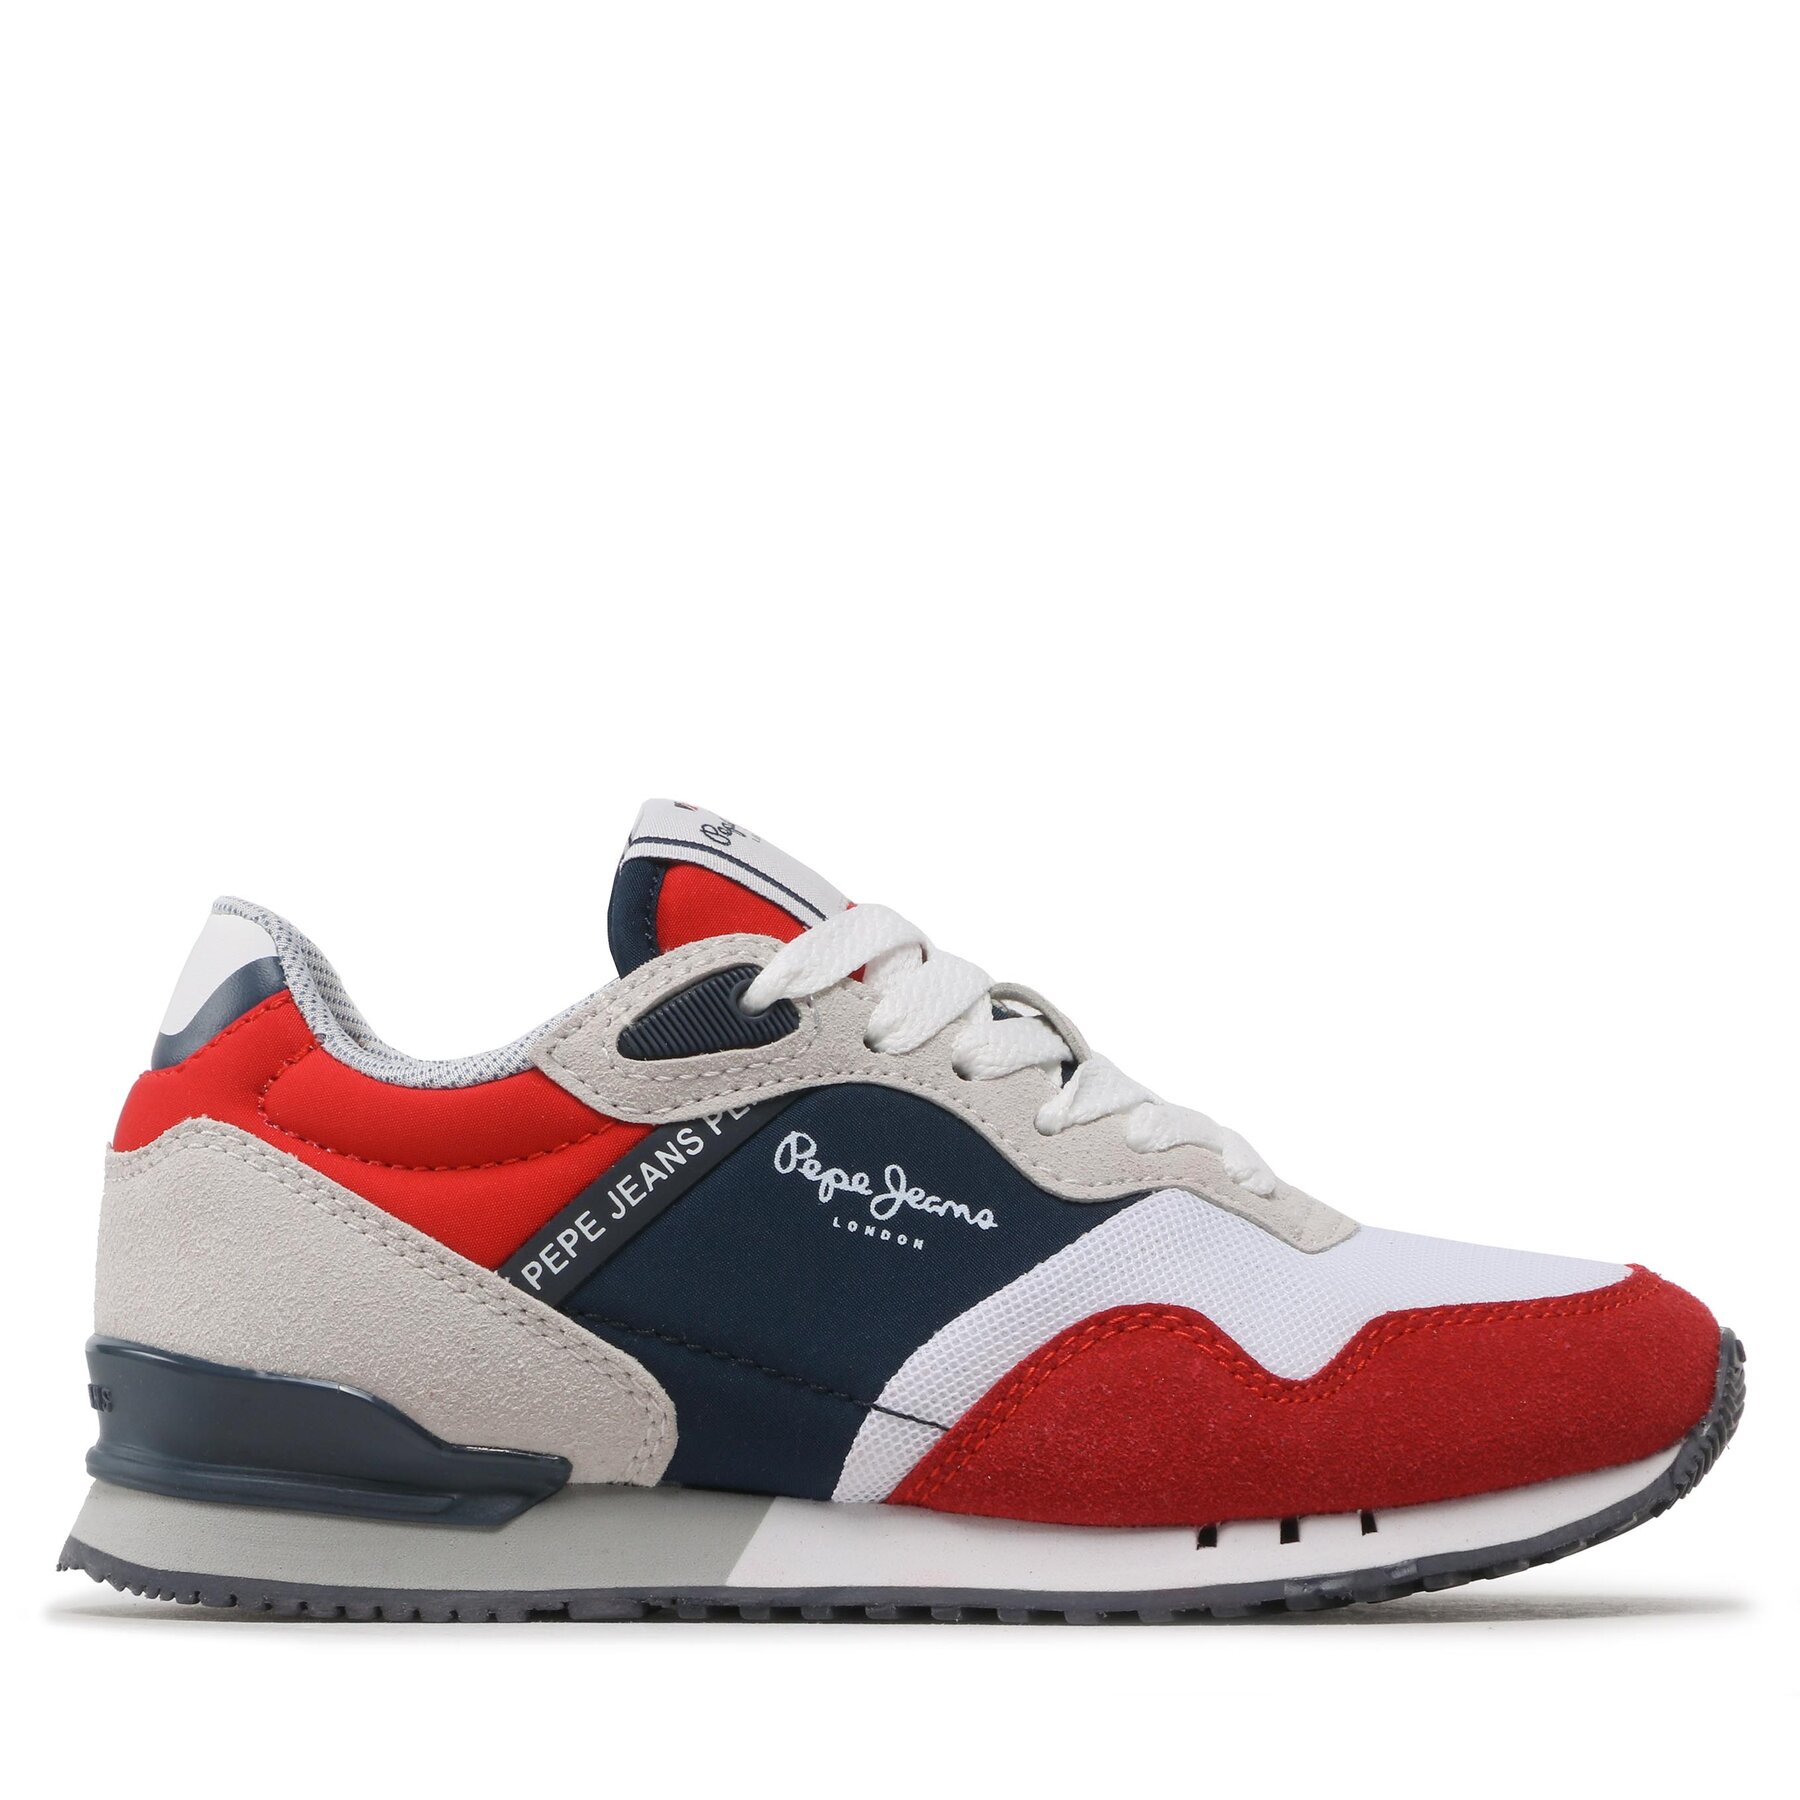 Sneakers Pepe Jeans London B May PBS30553 Red 255 von Pepe Jeans